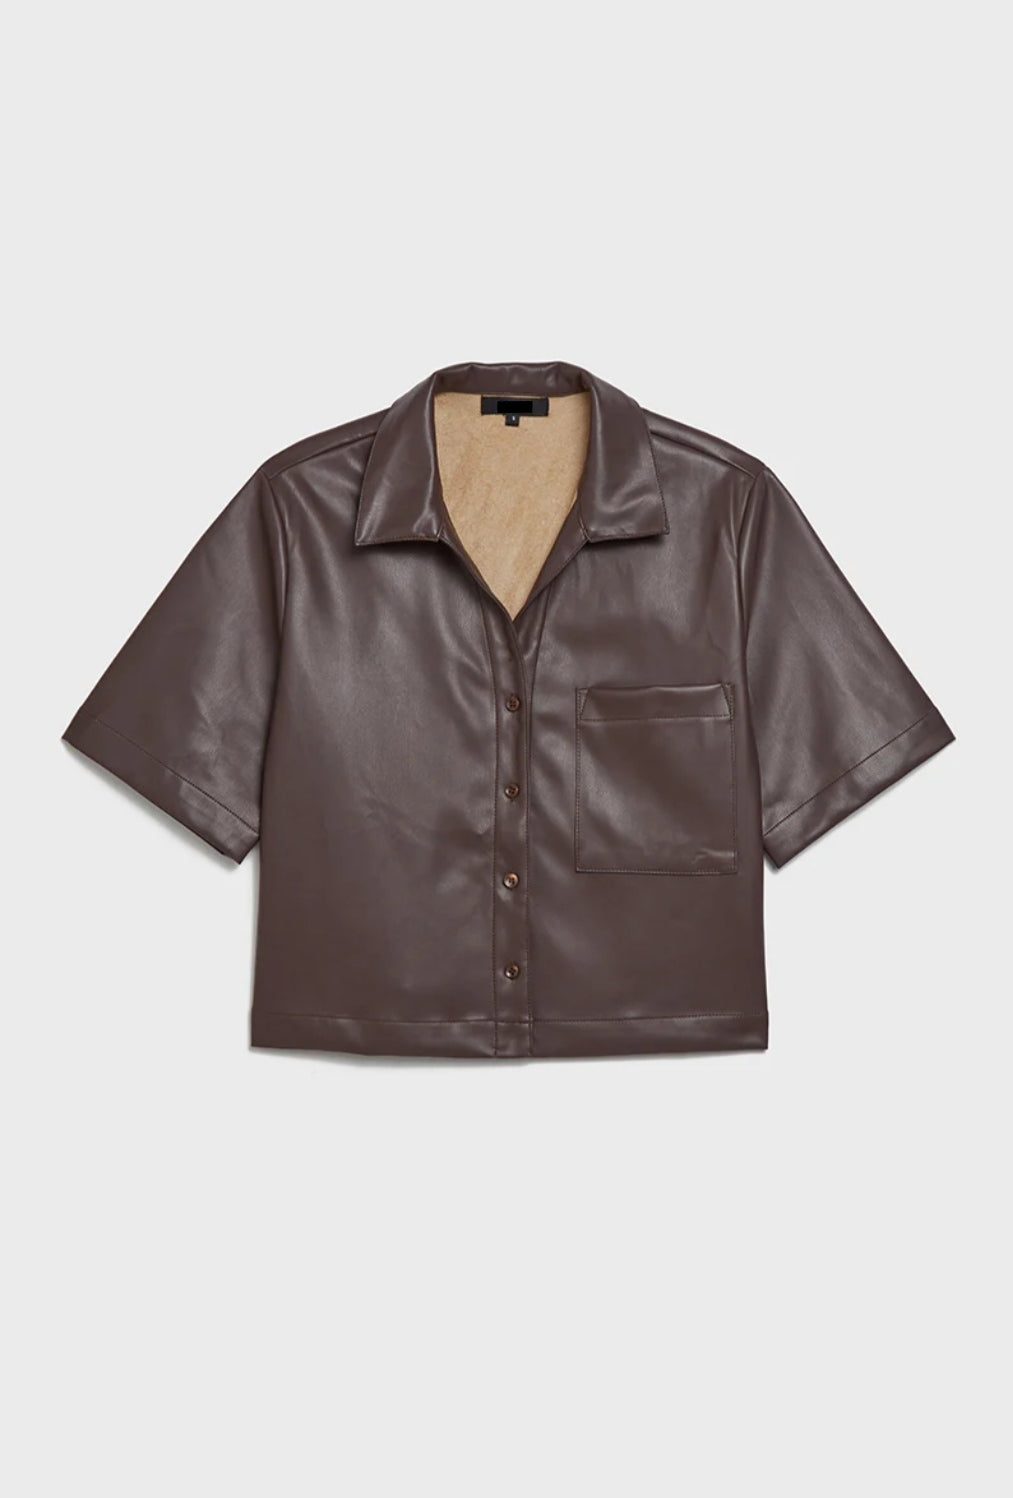 Women's Half Sleeve Short Leather Shirt In Coffee Brown